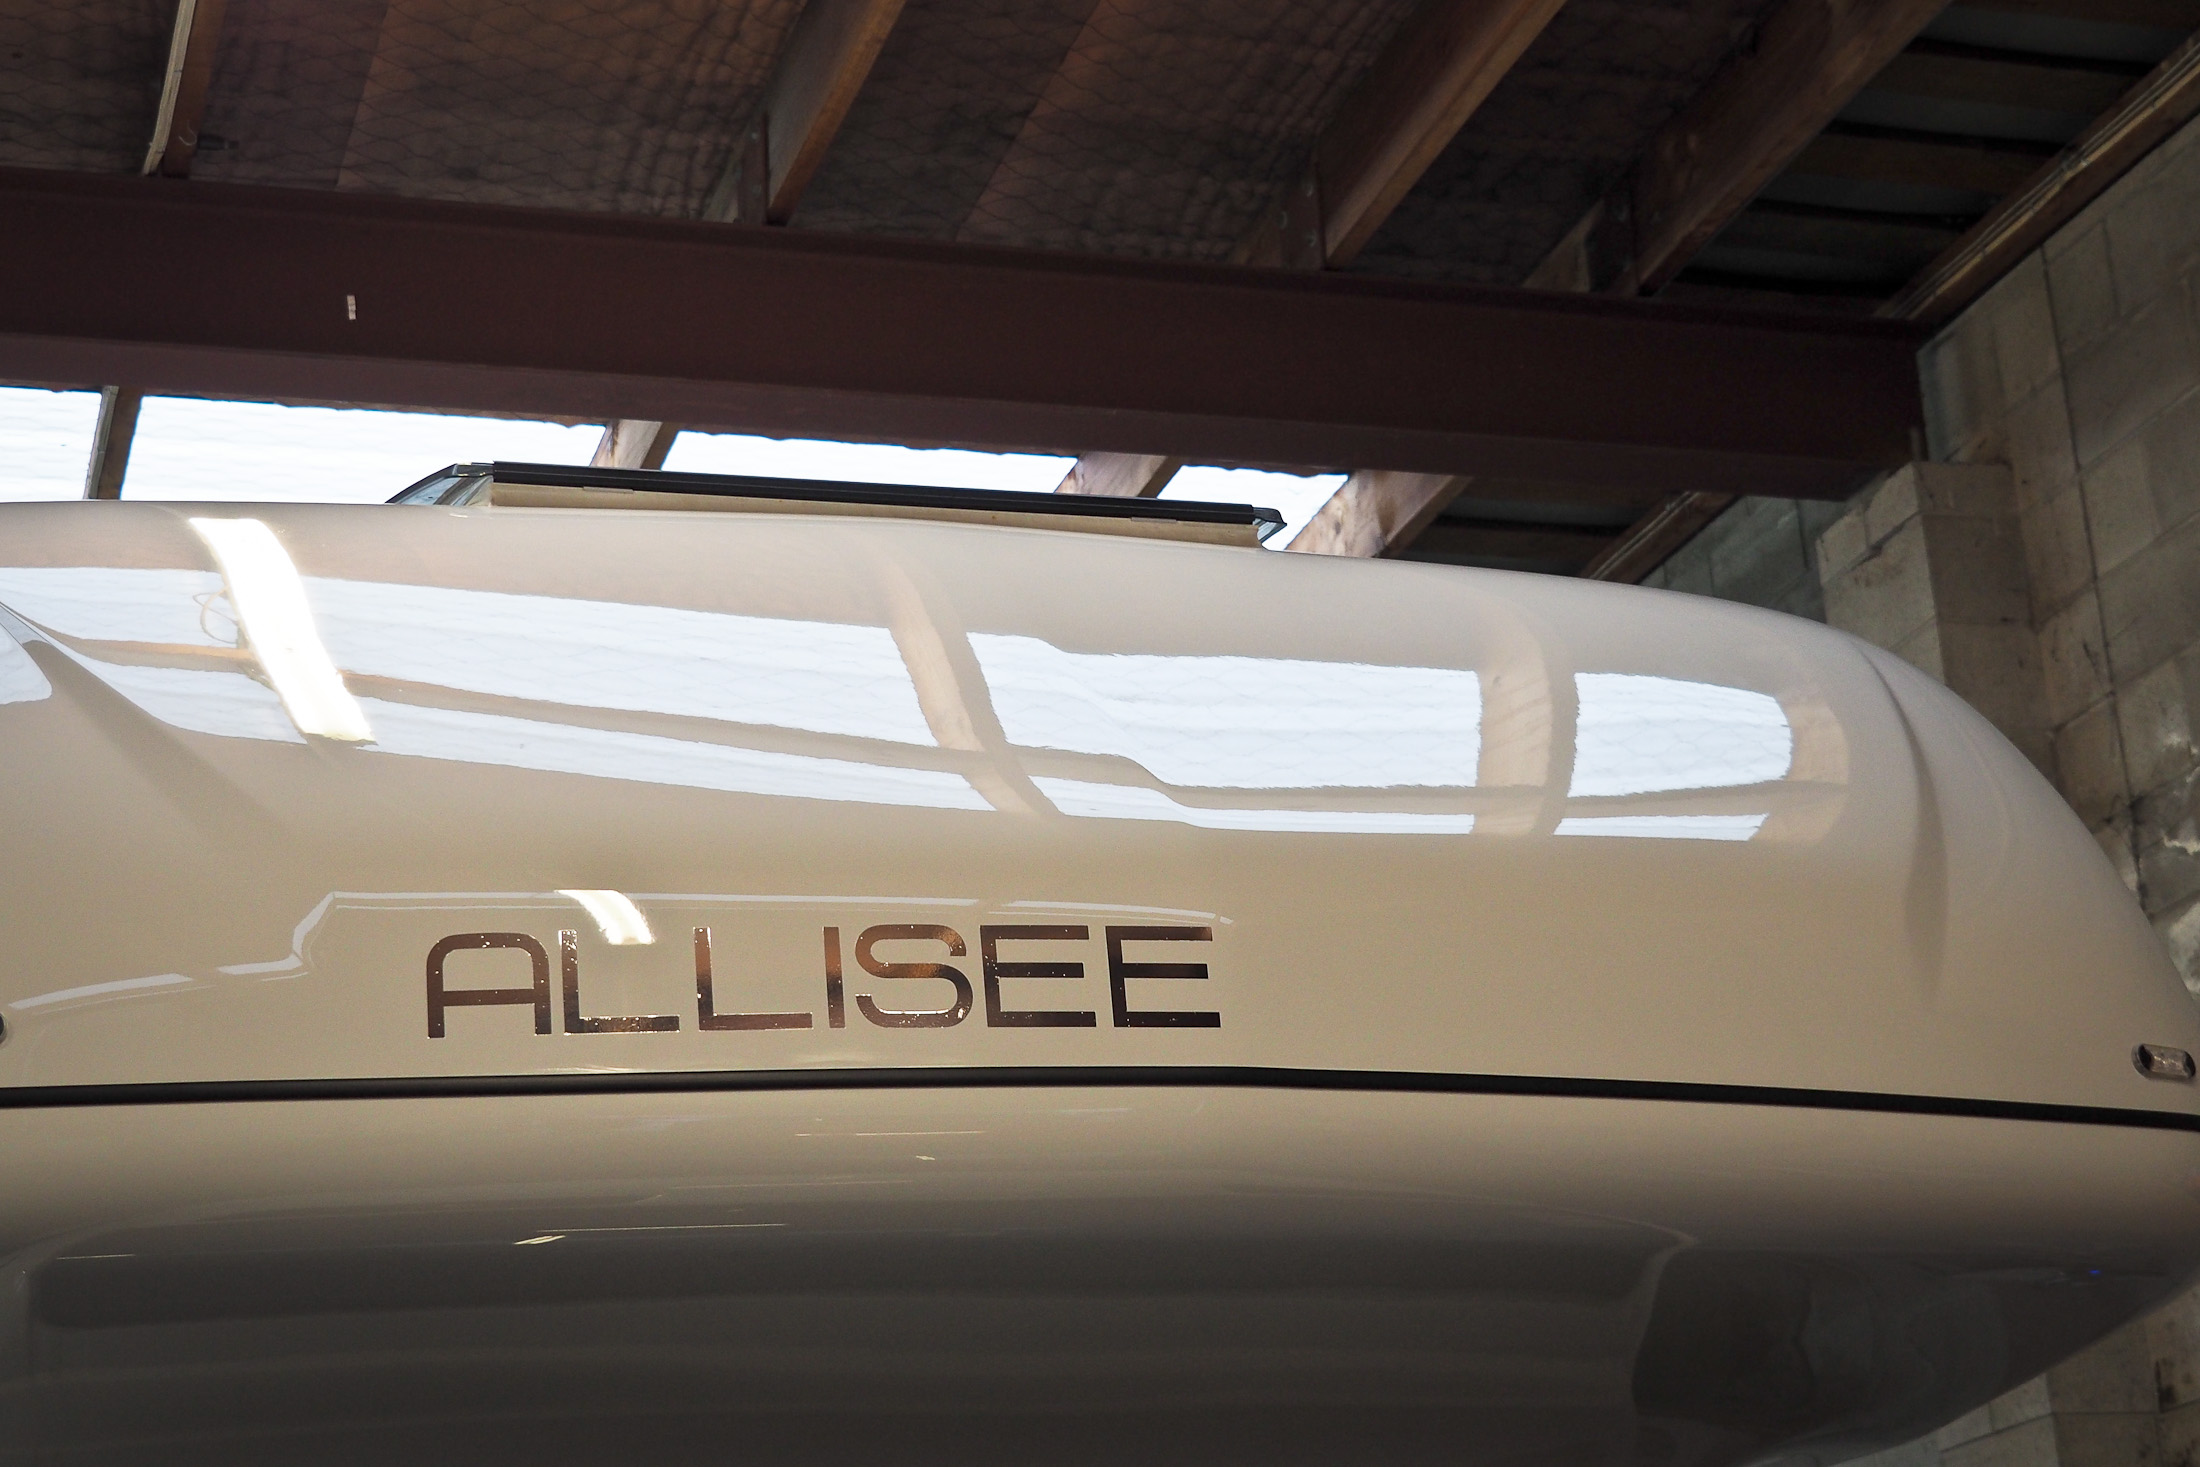 Top of camper with ALLISEE logo